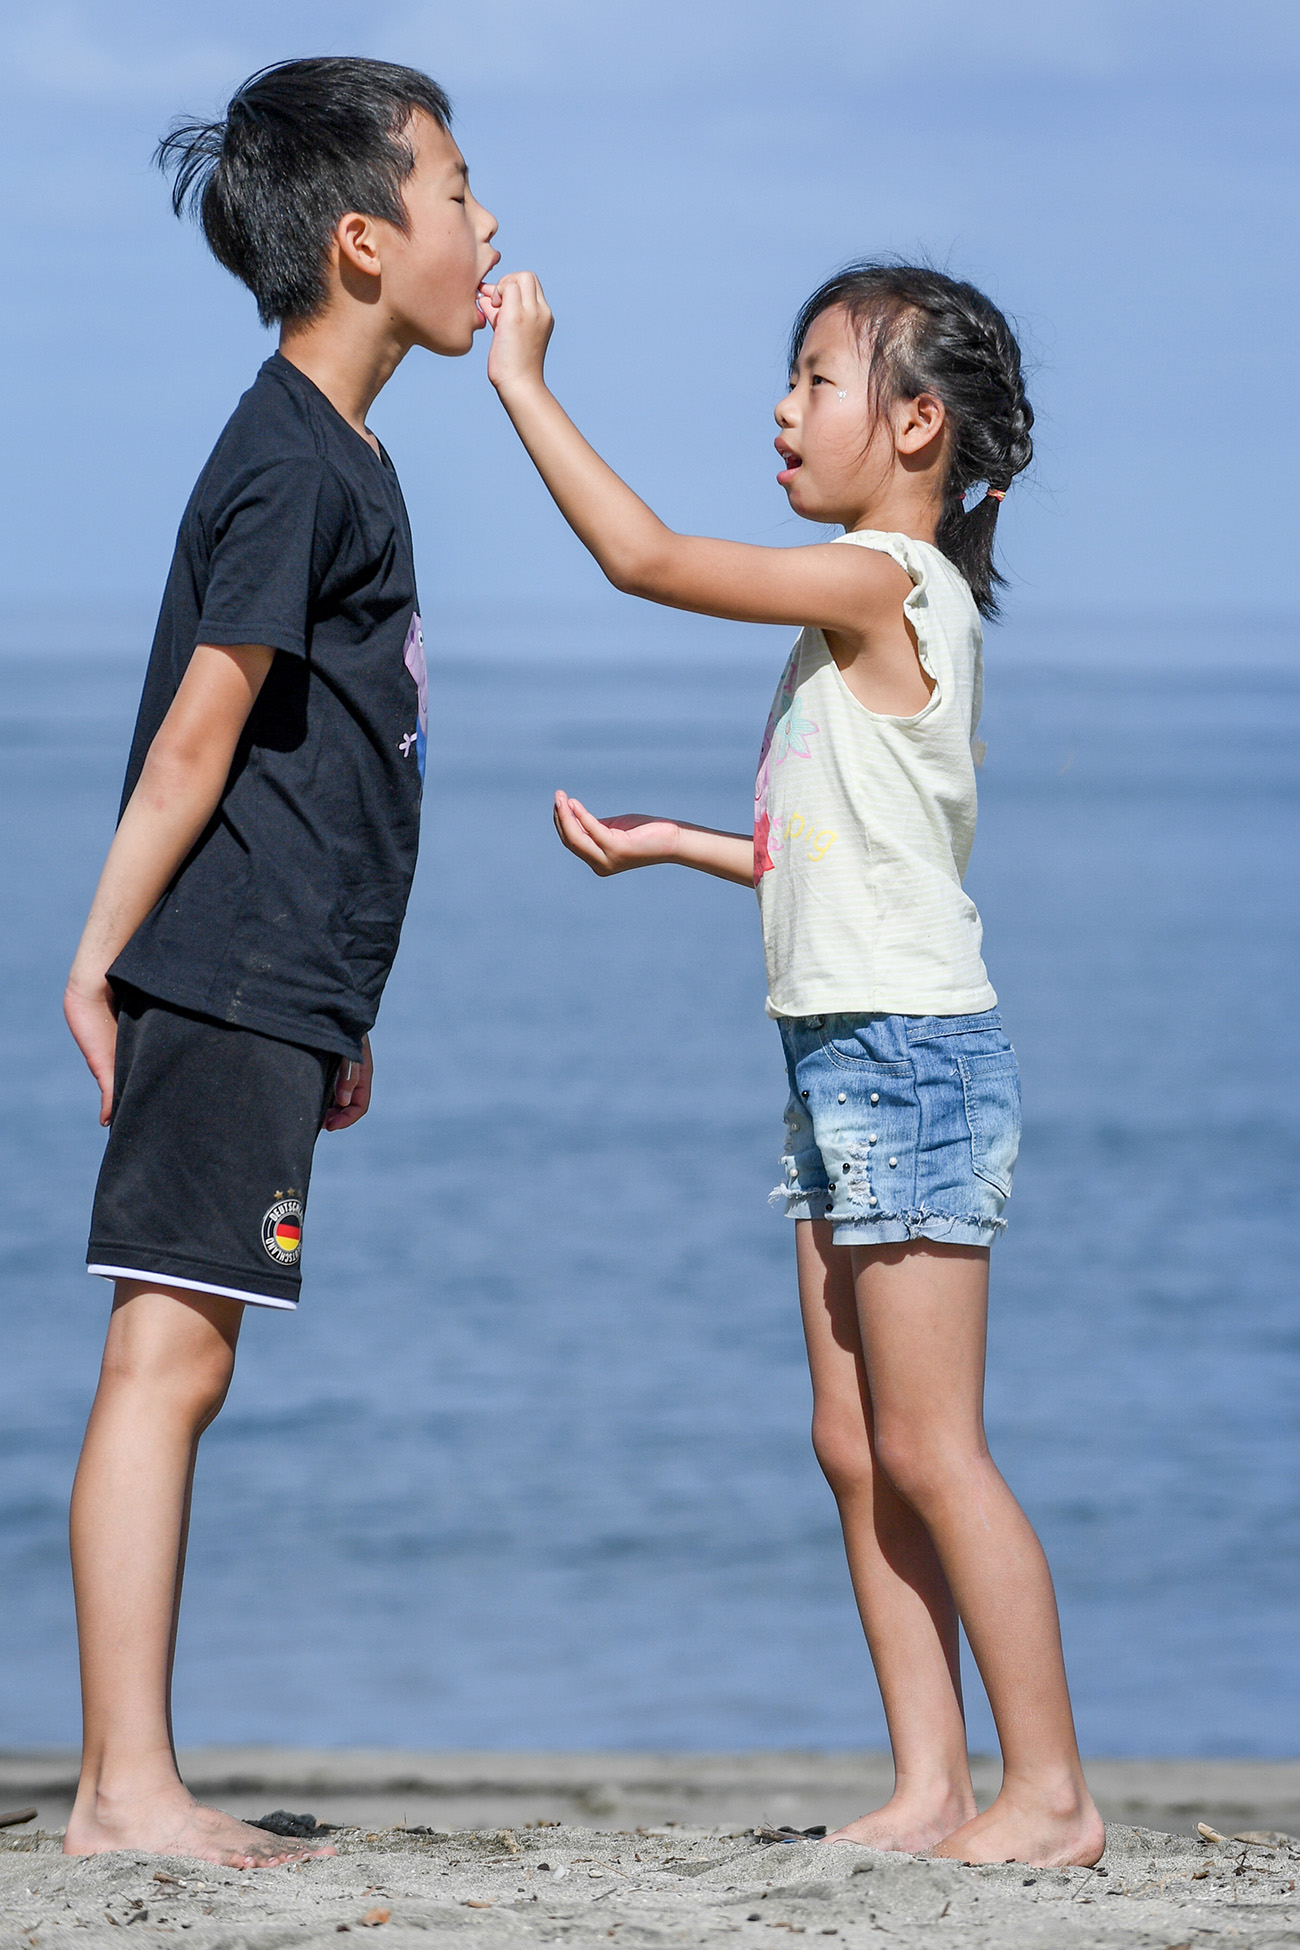 A sister feeds her brother with the Pacific ocean in the background